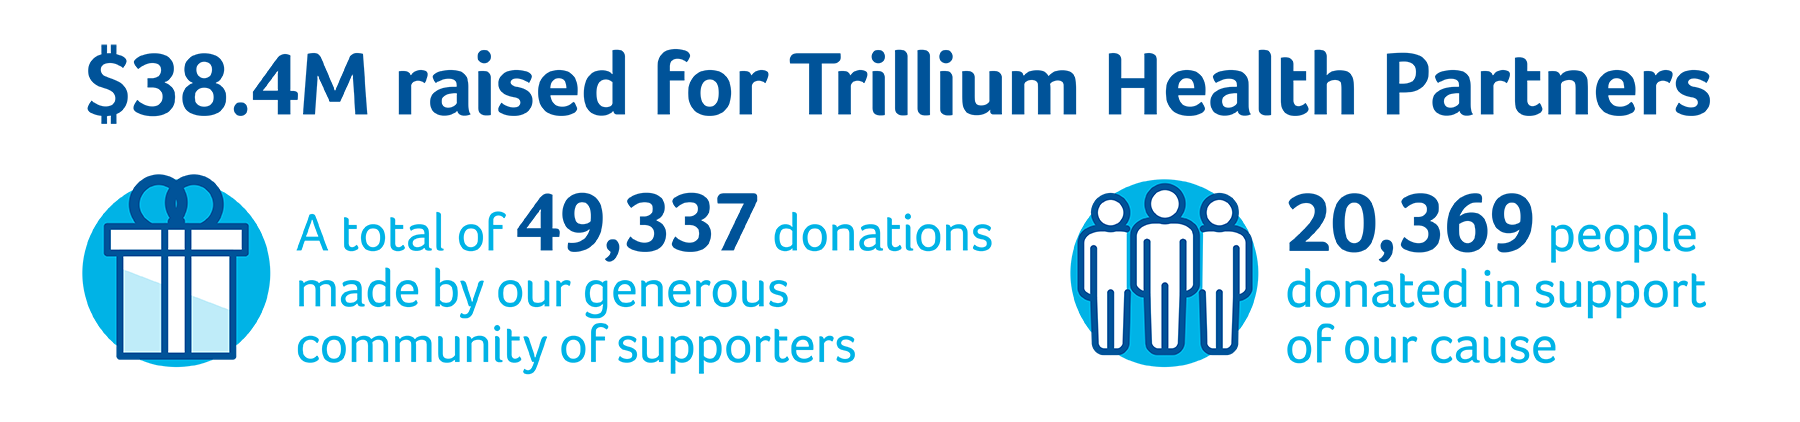 $38.4 Raised for Trillium Health Partners. A total of 49,337 donations made by our generous community of supporters. 20,369 people donated in supprt of our cause.